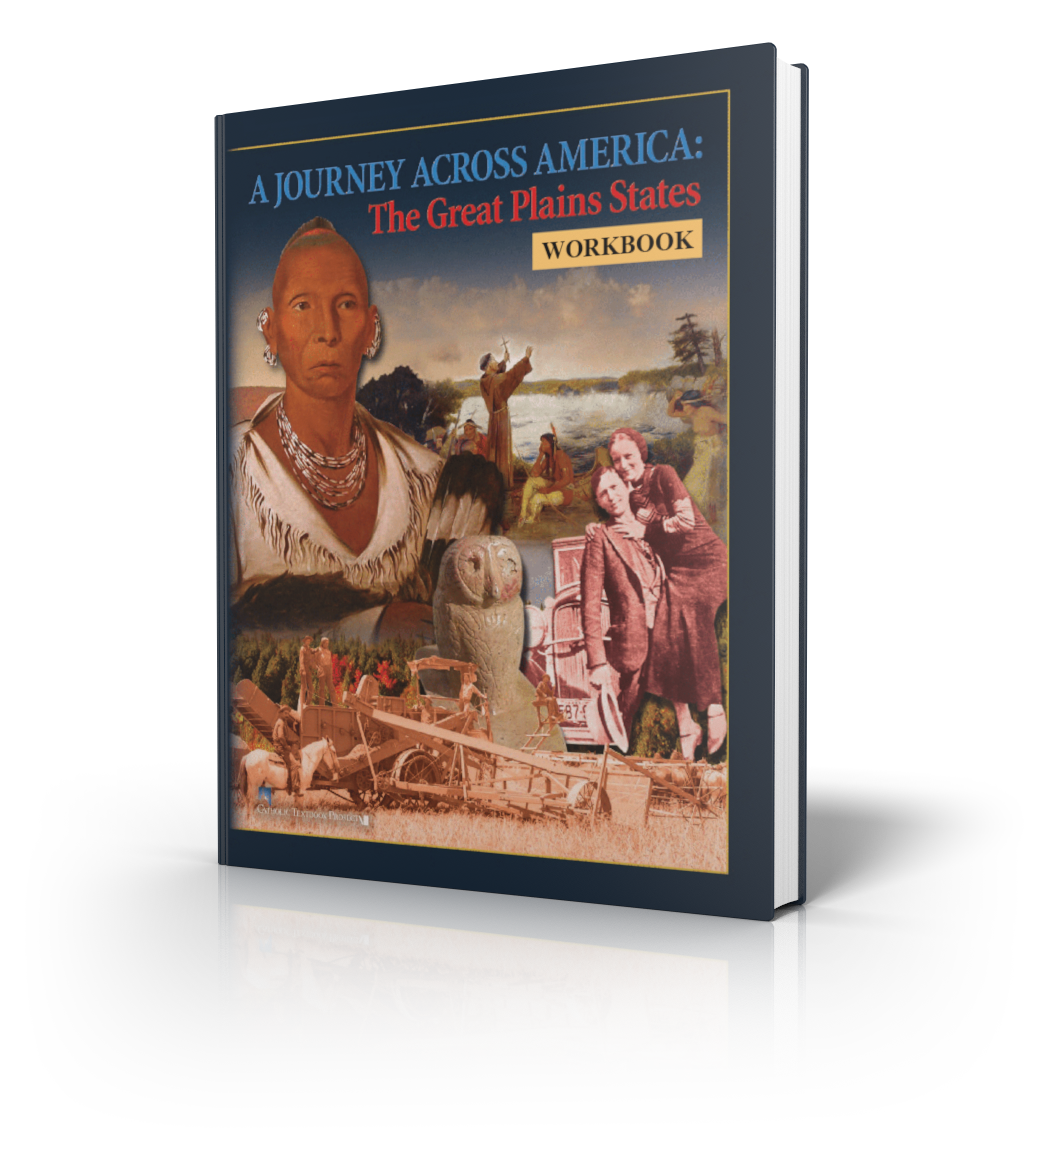 A Journey Across America: The Great Plains States (Workbook)